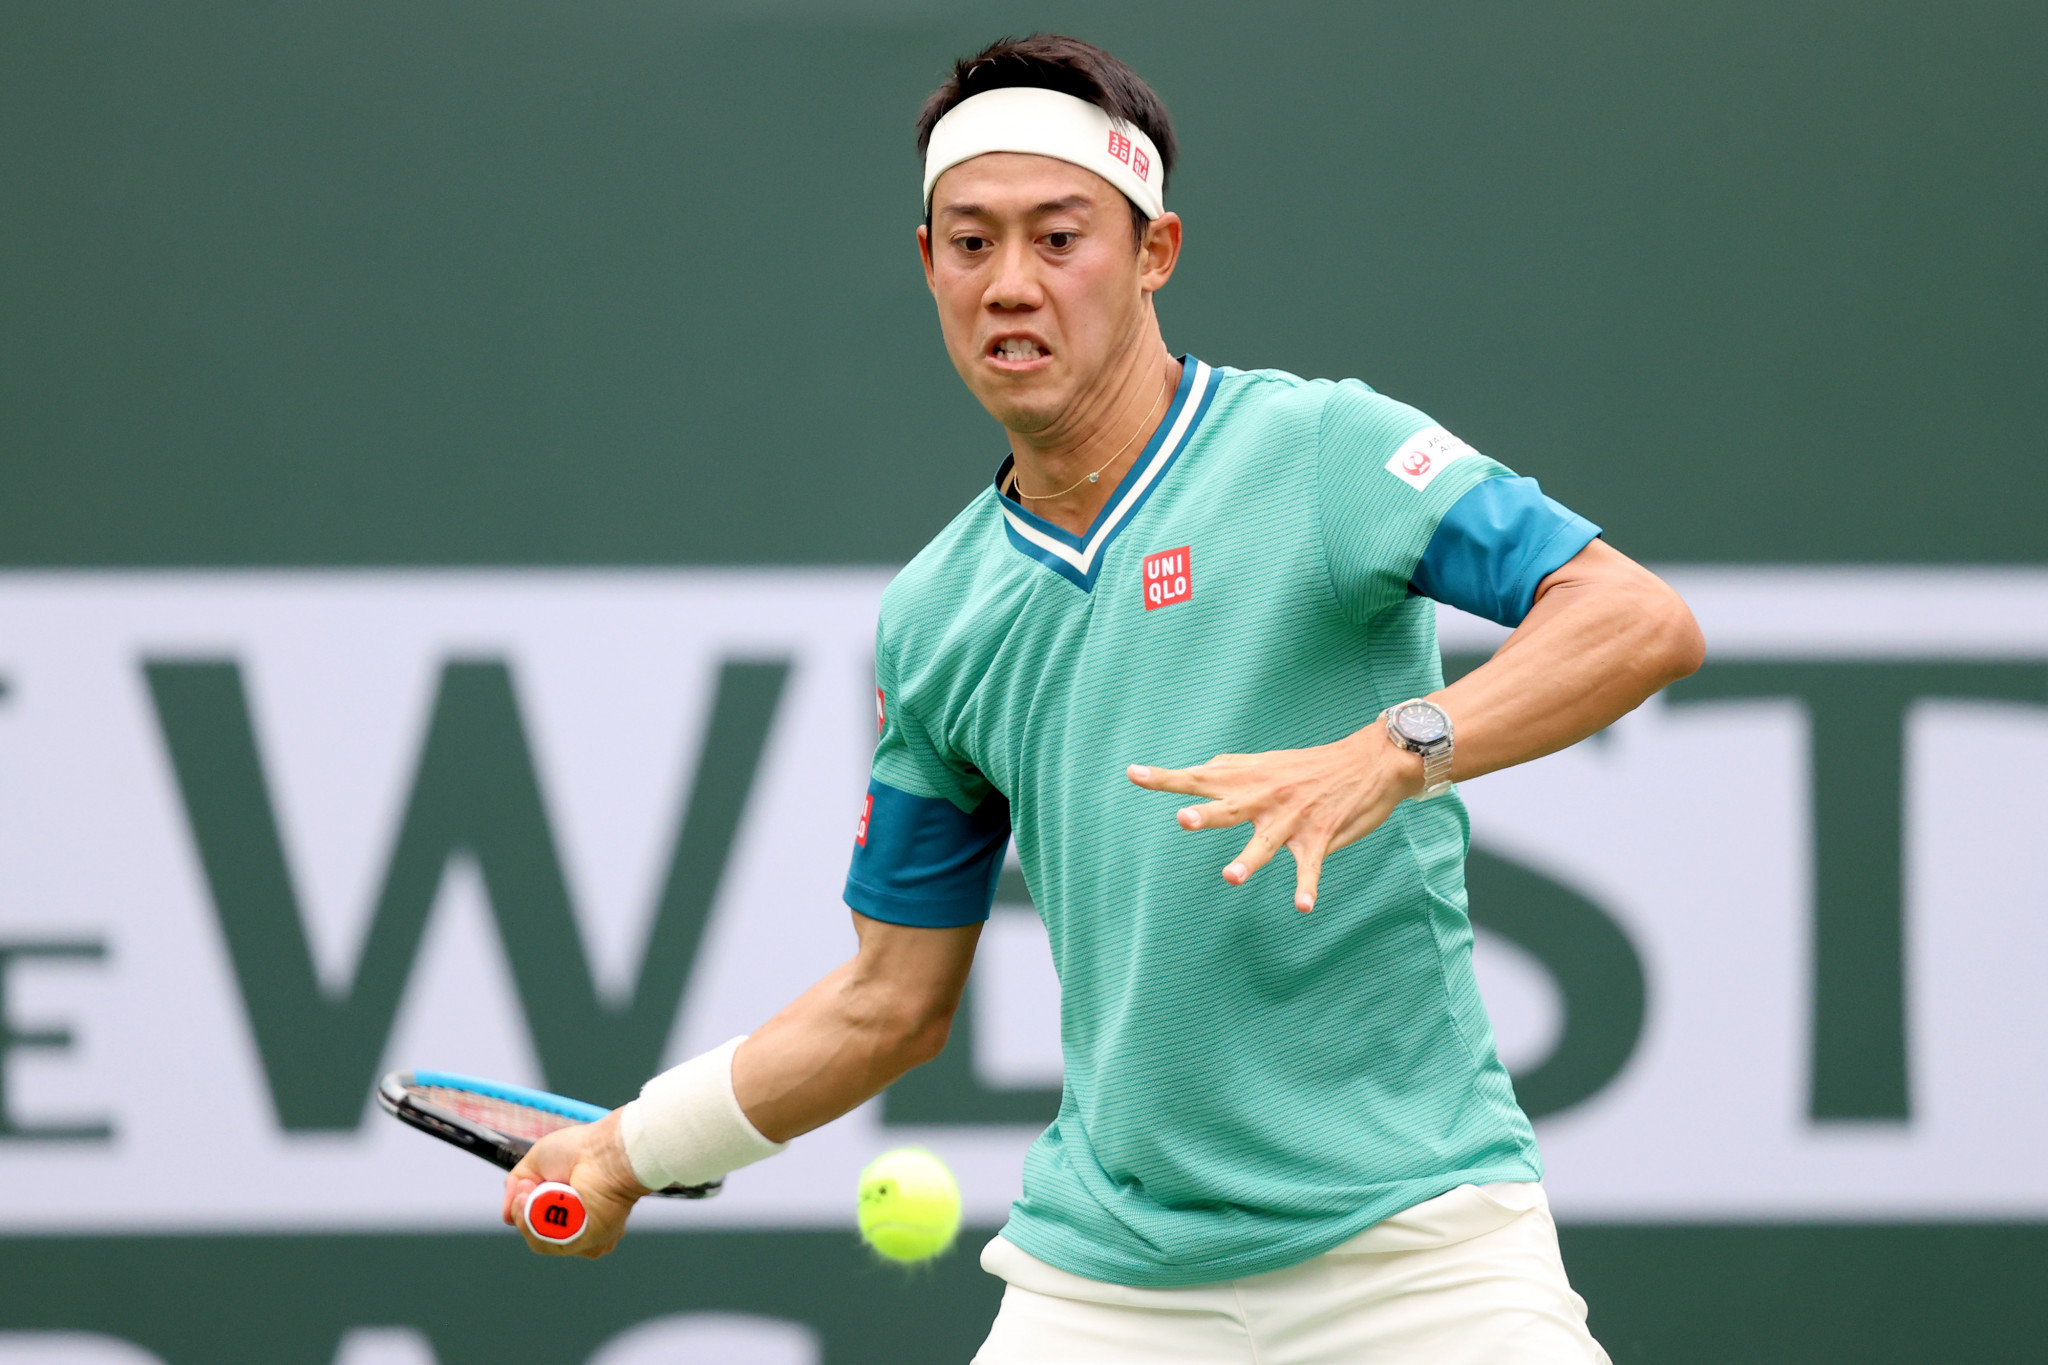 Kei Nishikori's has reached the quarter-finals of the Indian Wells Masters twice, in 2016 and 2017 ©Getty Images